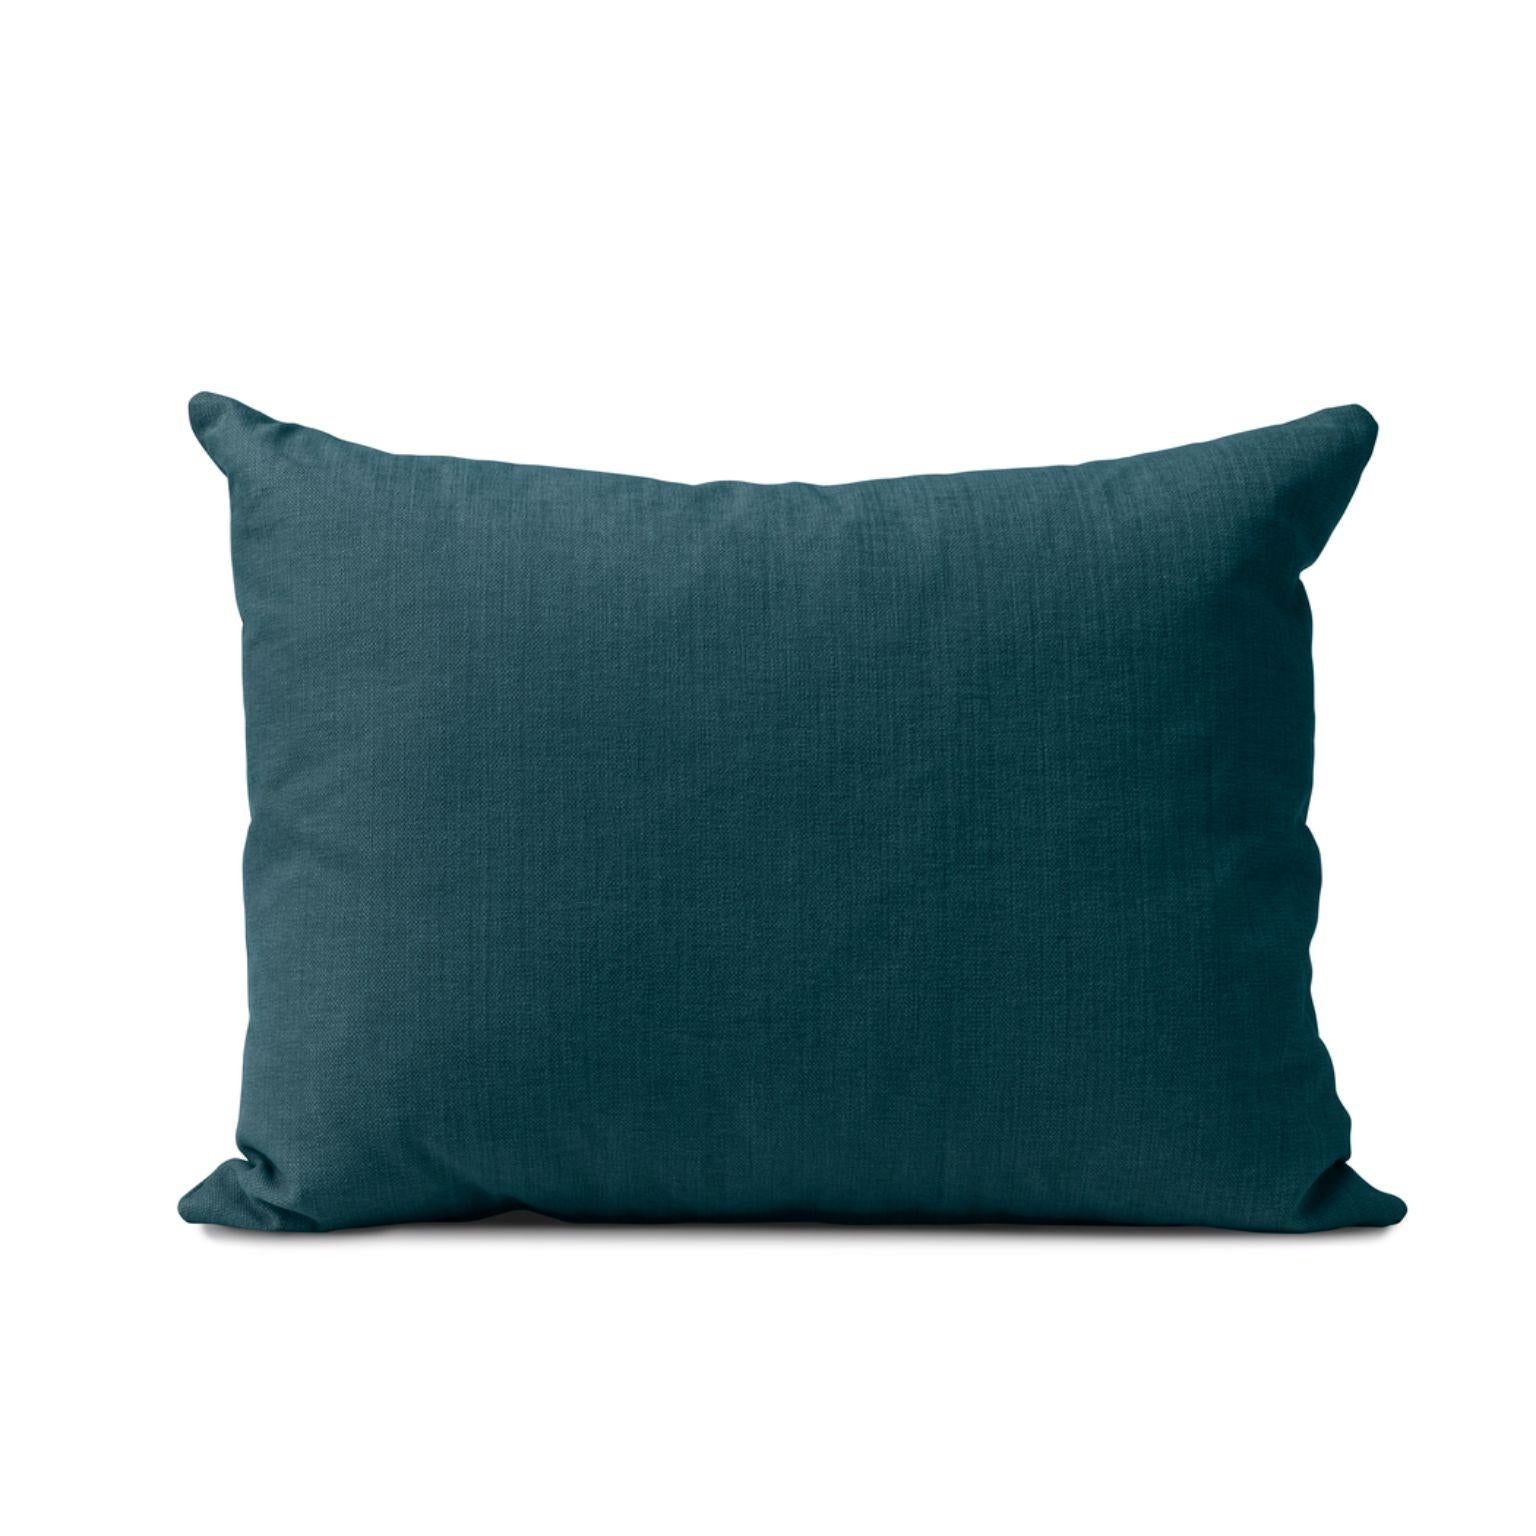 Galore cushion square dark teal by Warm Nordic
Dimensions: W 70 x D 15 x H 50 cm
Material: Textile upholstery, Granulate and feathers filling.
Weight: 1.4 kg
Also available in different colors and finishes. 

An elegant oversized sofa cushion,